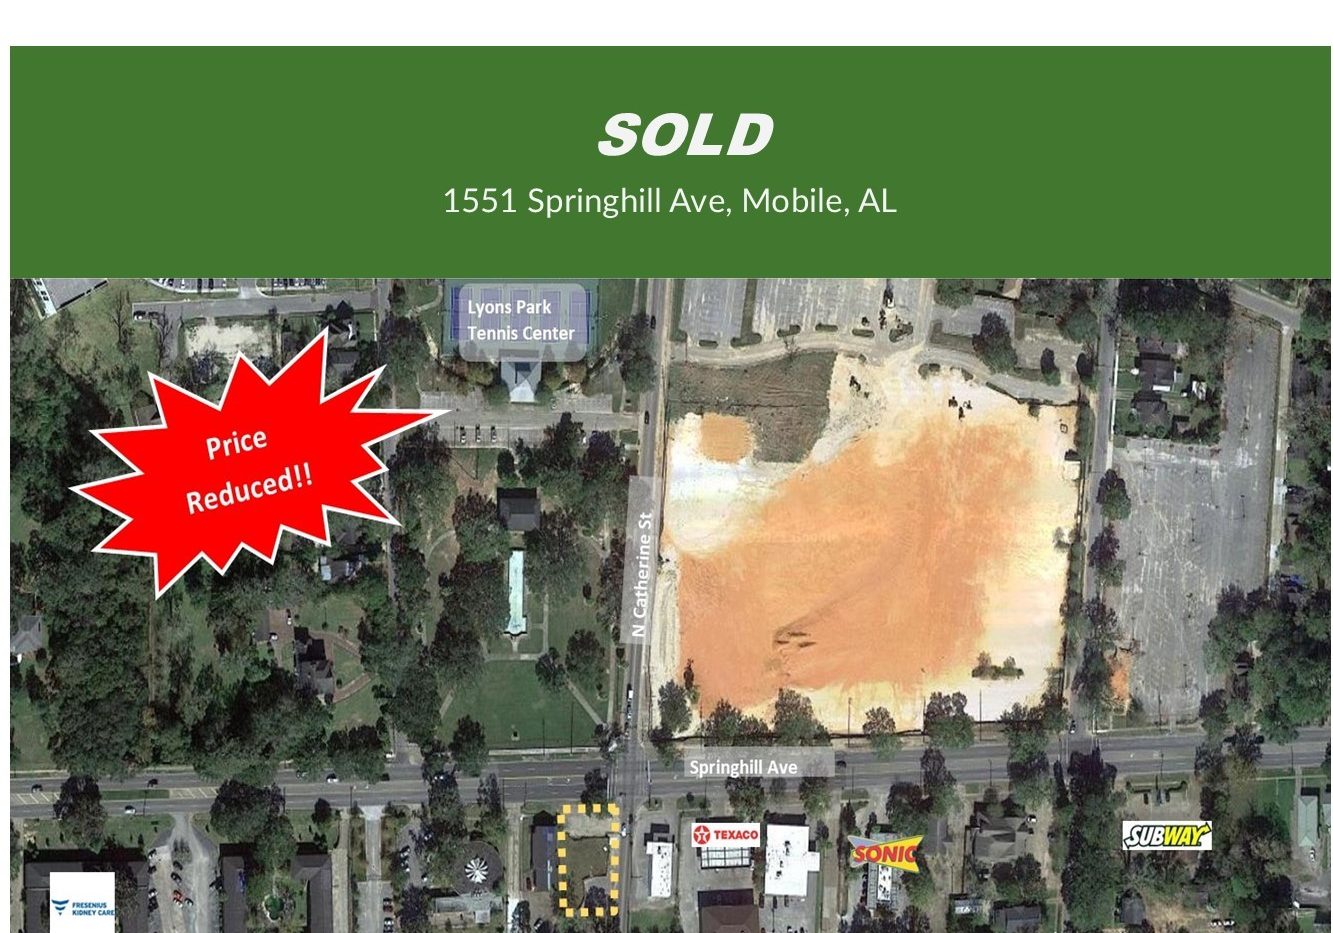 SPRINGHILL AVENUE AND NORTH CATHERINE STREET PROPERTY SOLD